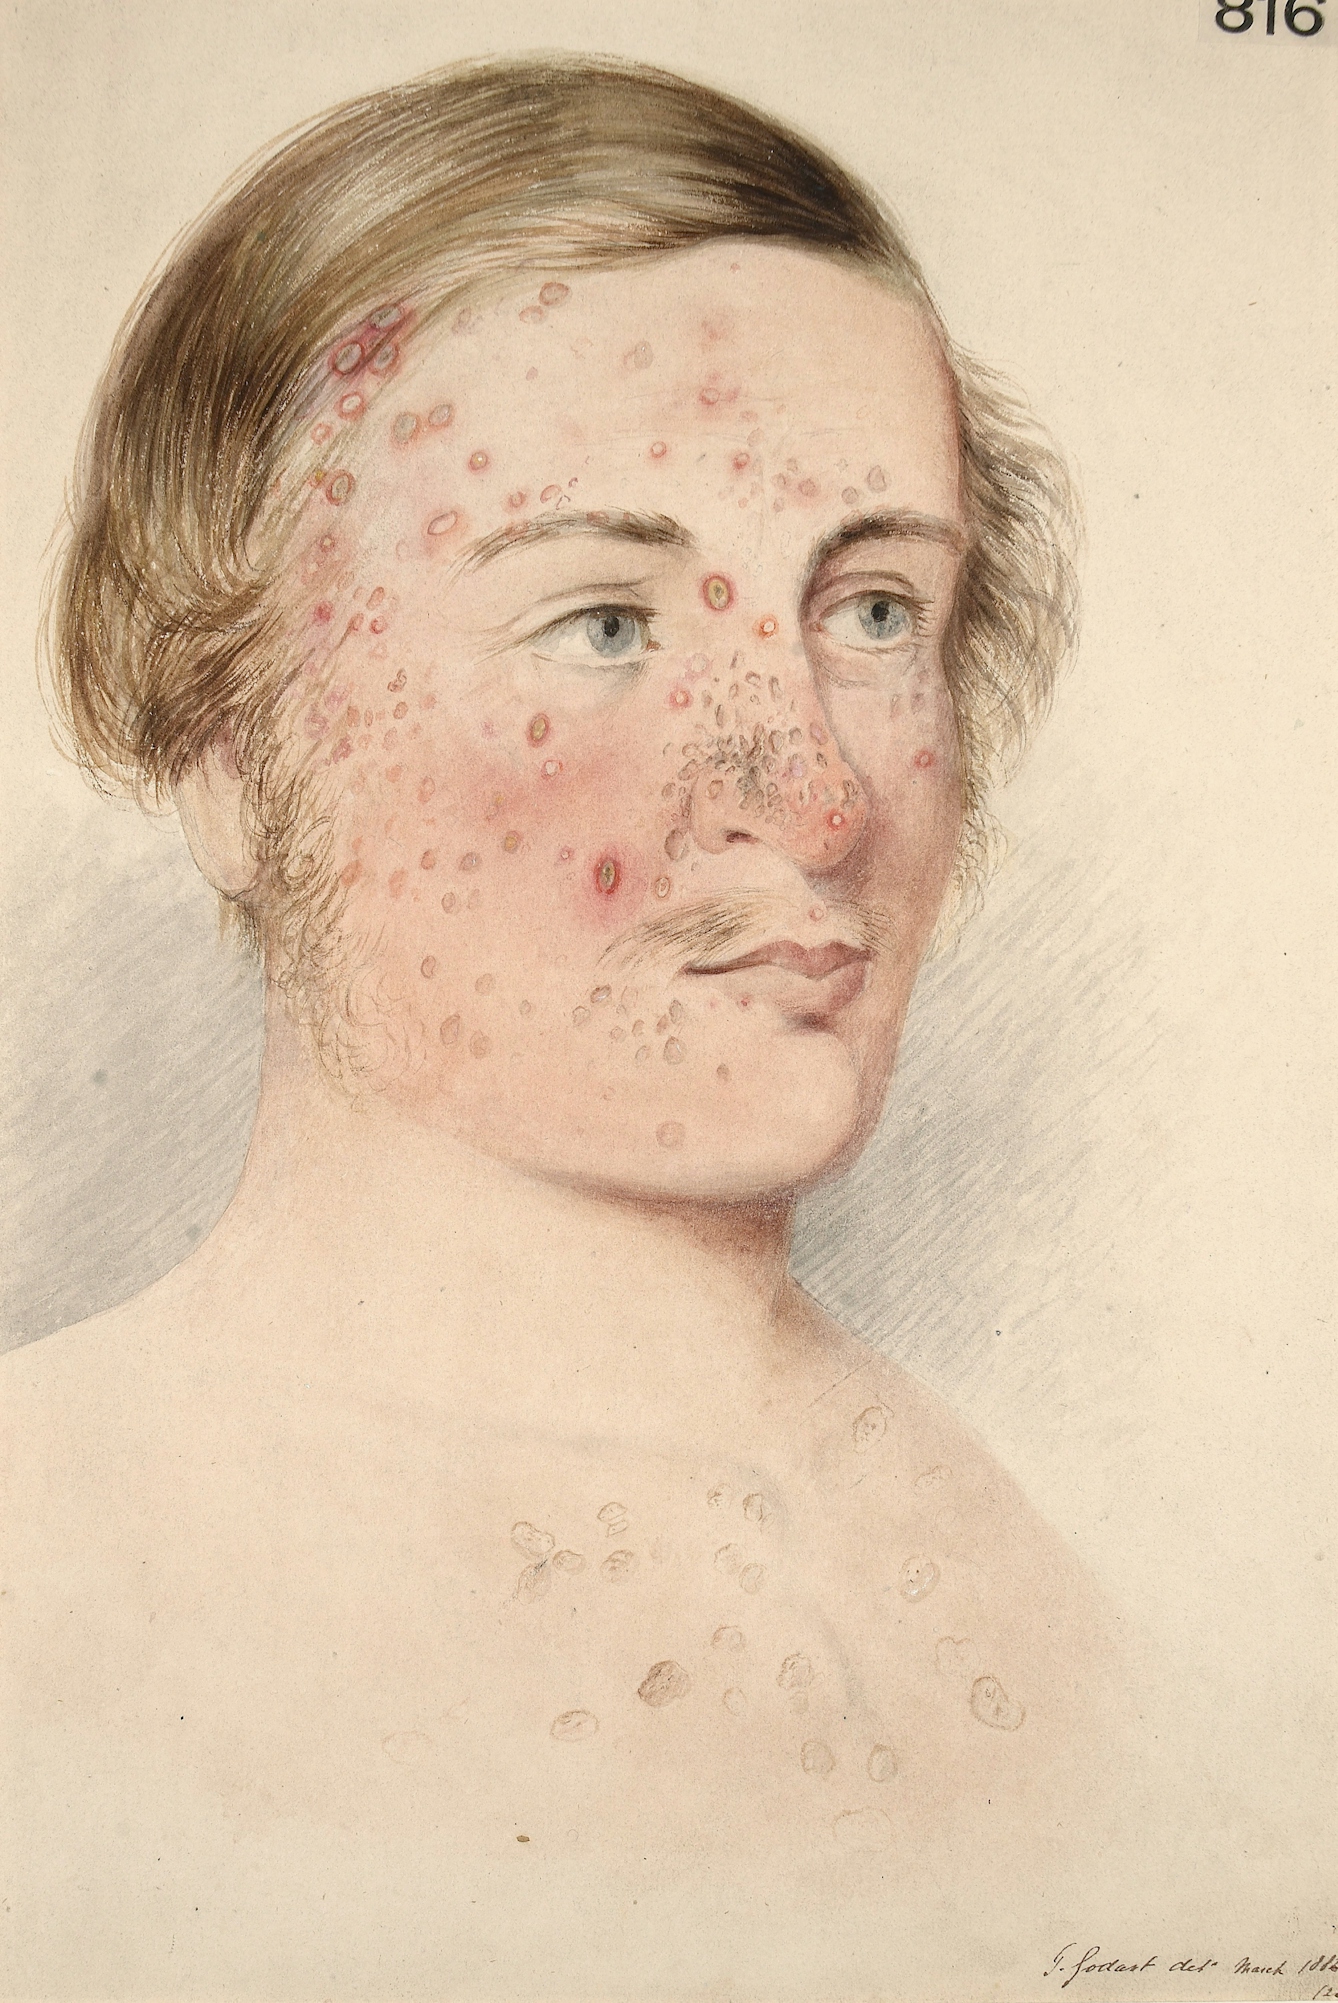 Photograph of an illustration showing the head and shoulders of a man, with red acne marks on his face, neck and chest.